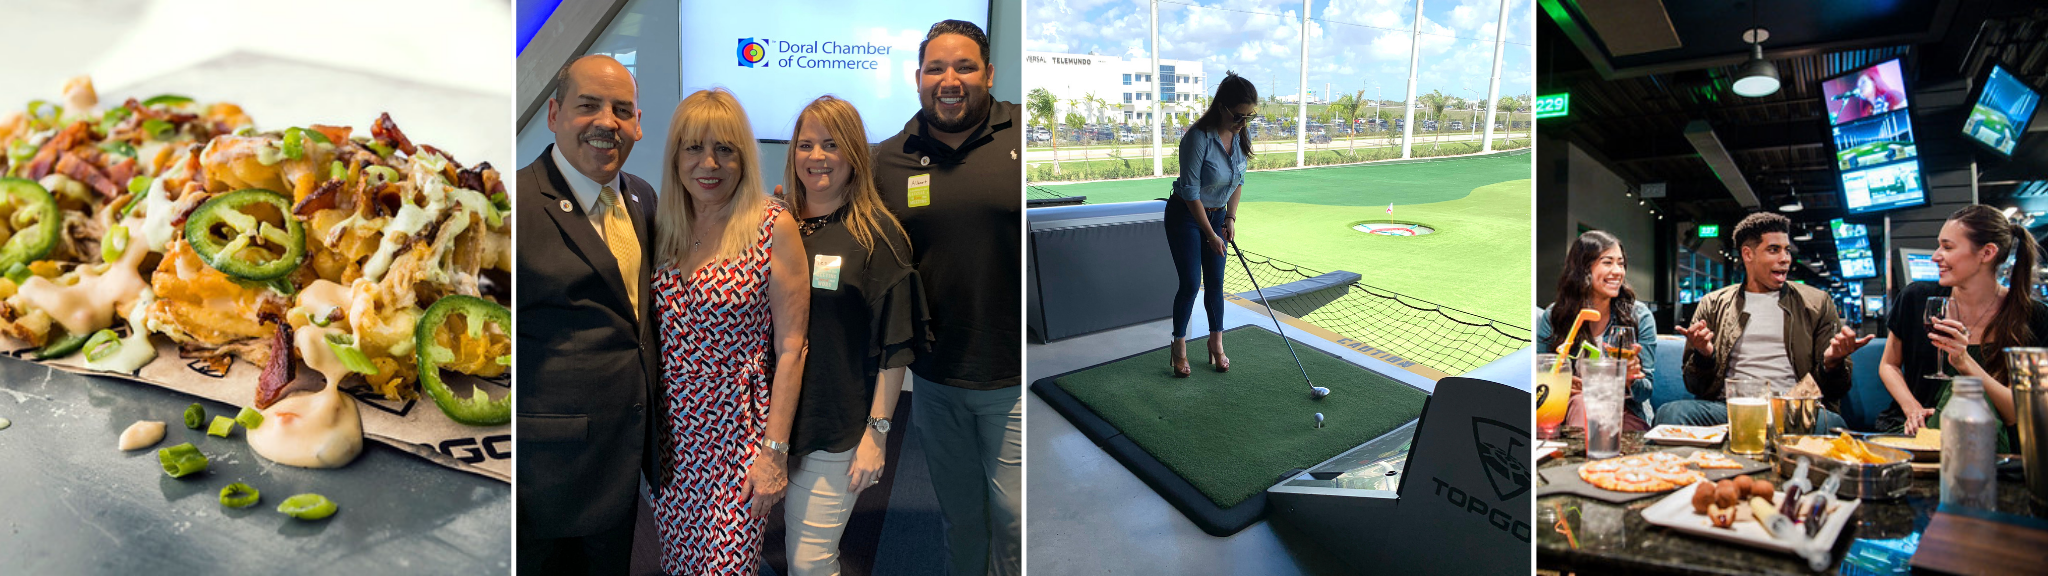 Collage Top Golf Networking Event